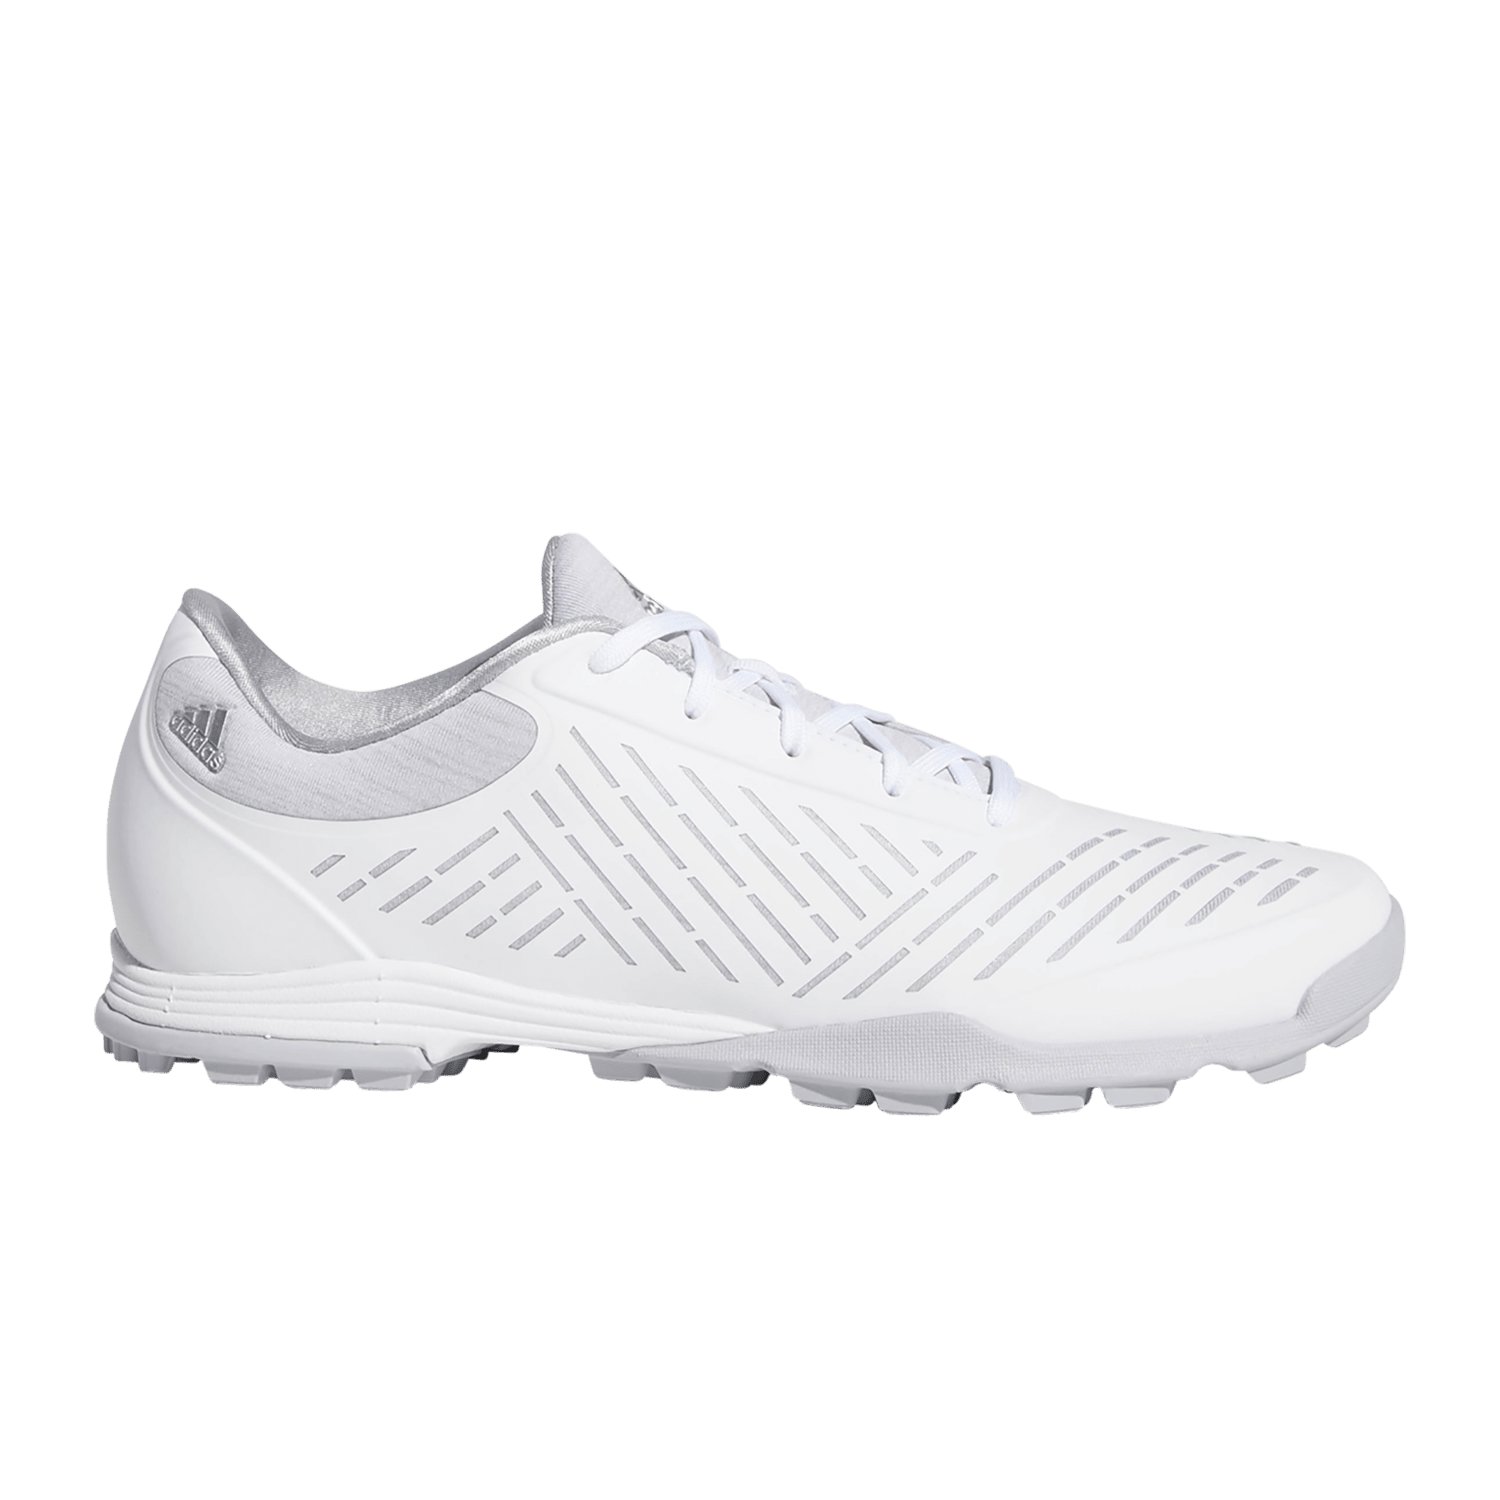 adipure sport 2.0 shoes